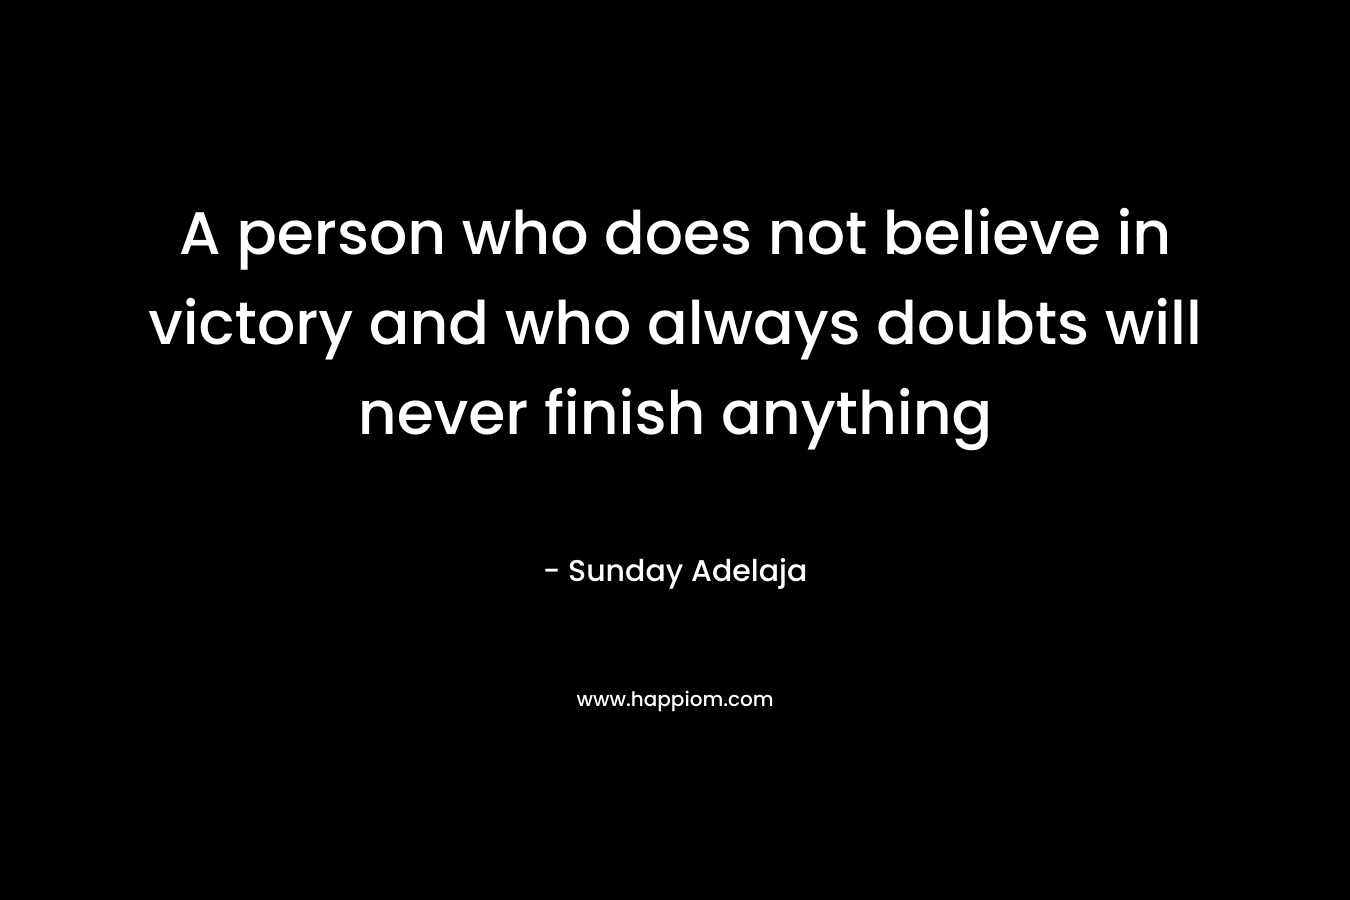 A person who does not believe in victory and who always doubts will never finish anything